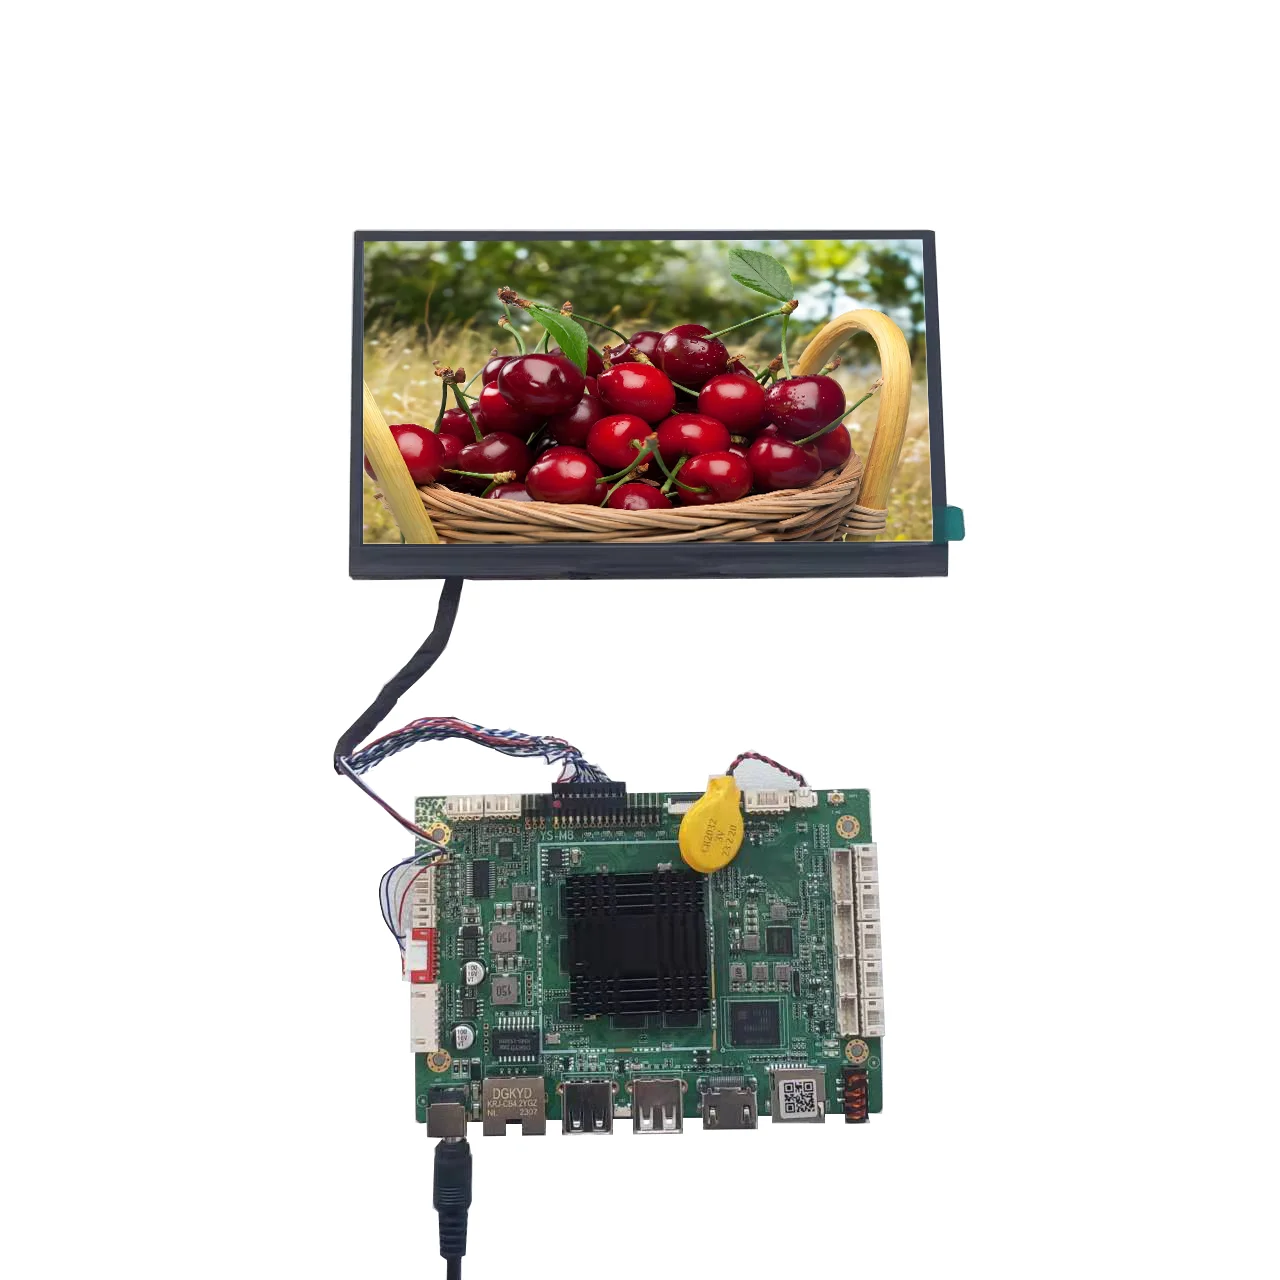 

CS07036DA-10 CAISON 7 inch 1000 nits resolution 1924x600 lcd screen with ys-m8 android board input LVDS speaker output